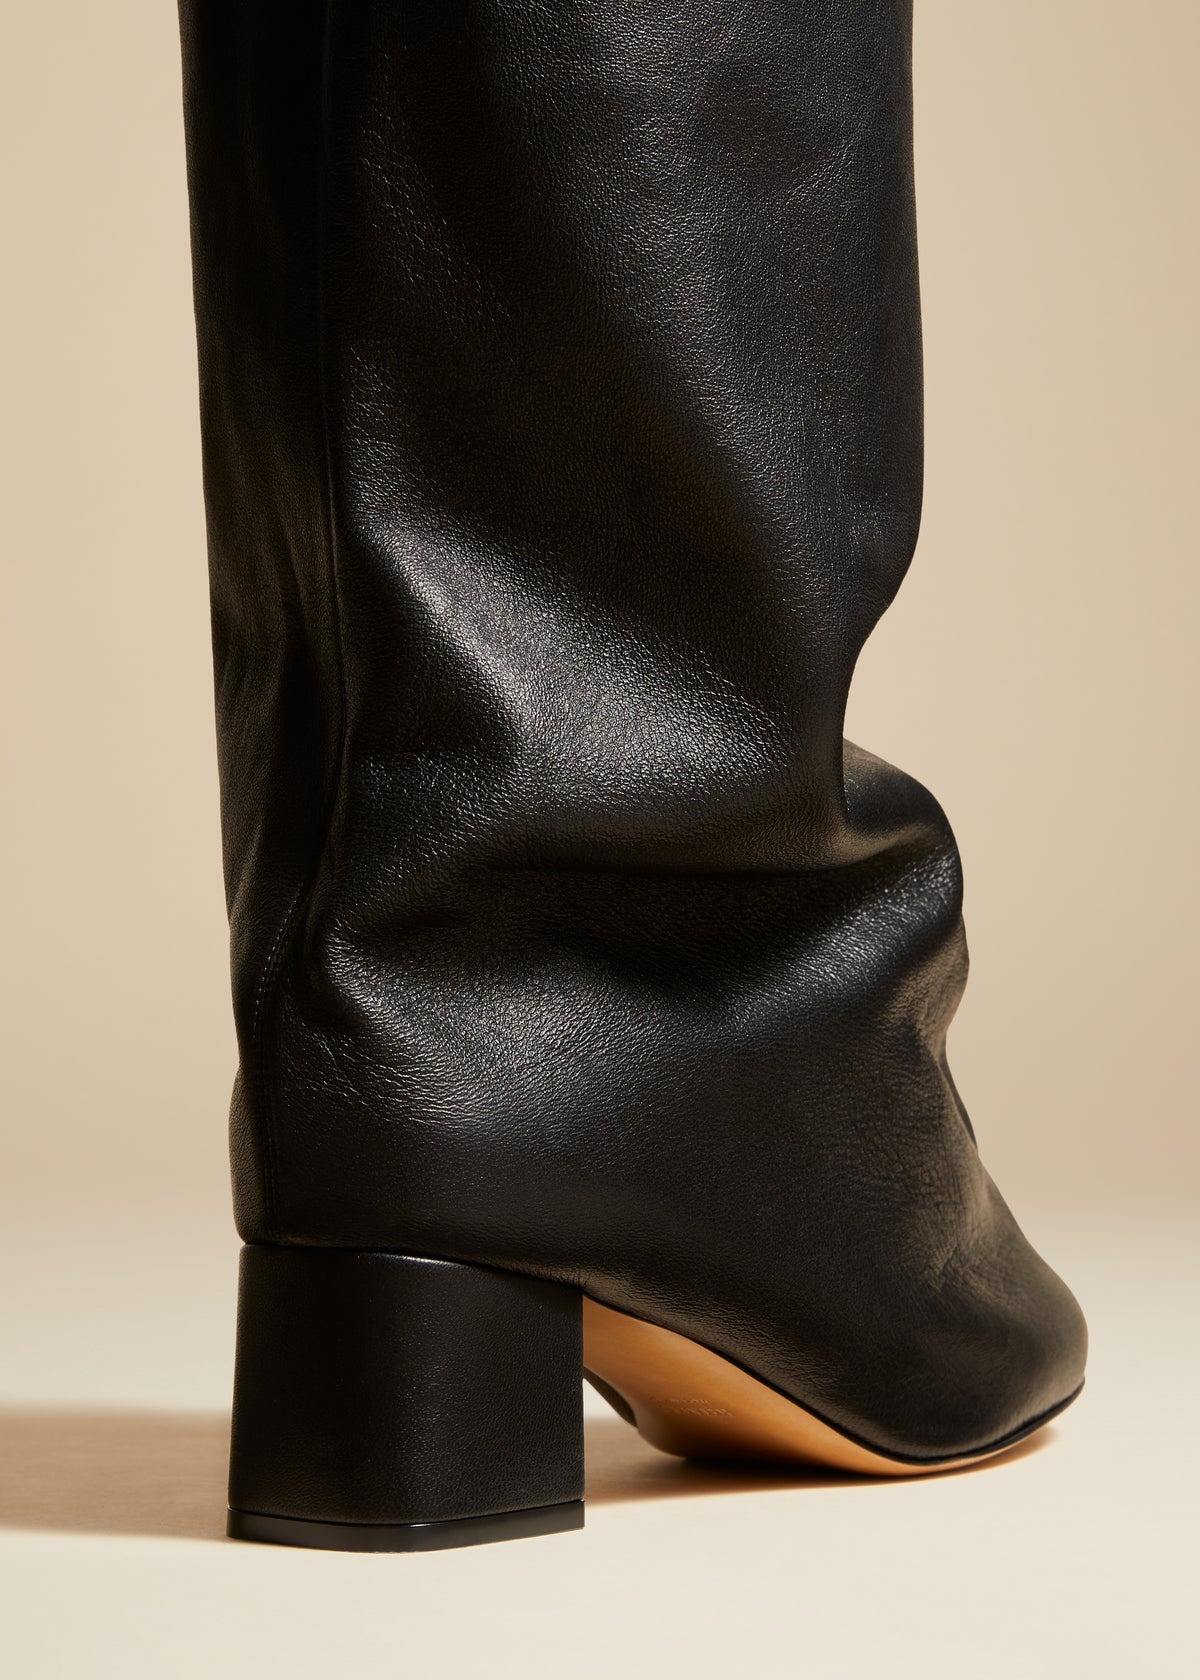 The Bowe Over-the-Knee Boot in Black Leather - 3